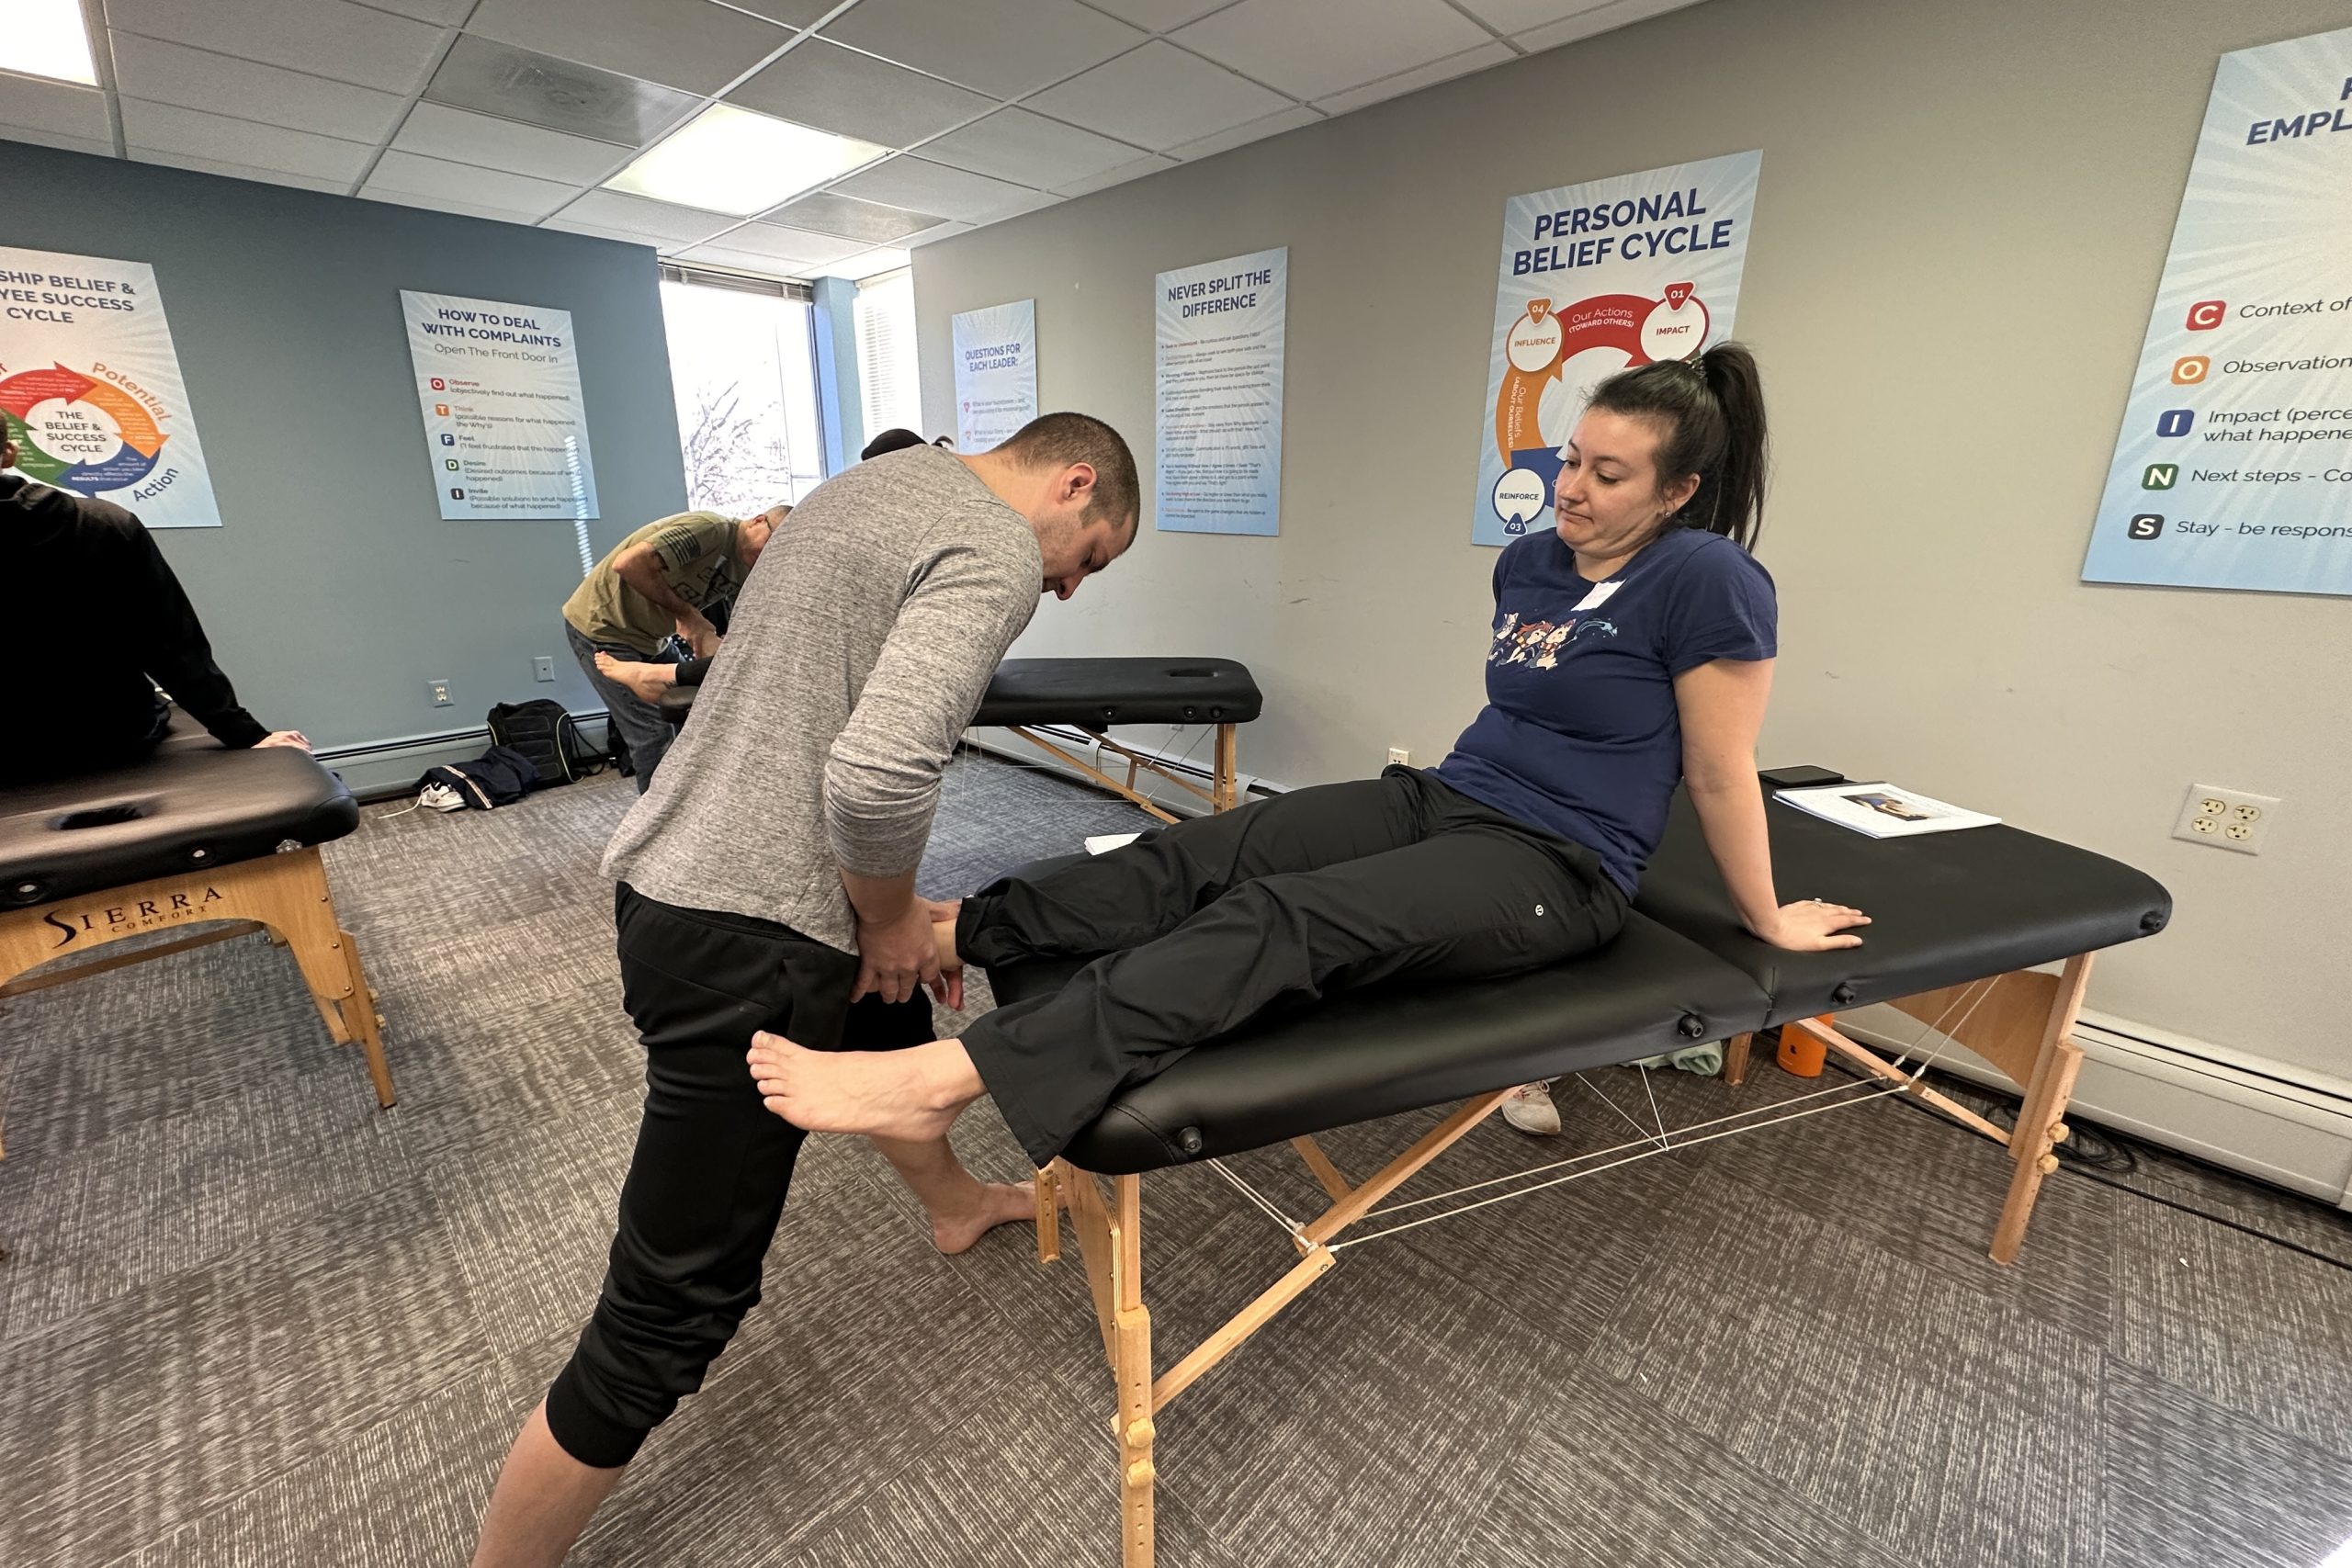 physical therapists practicing new techniques learning at running CEU course